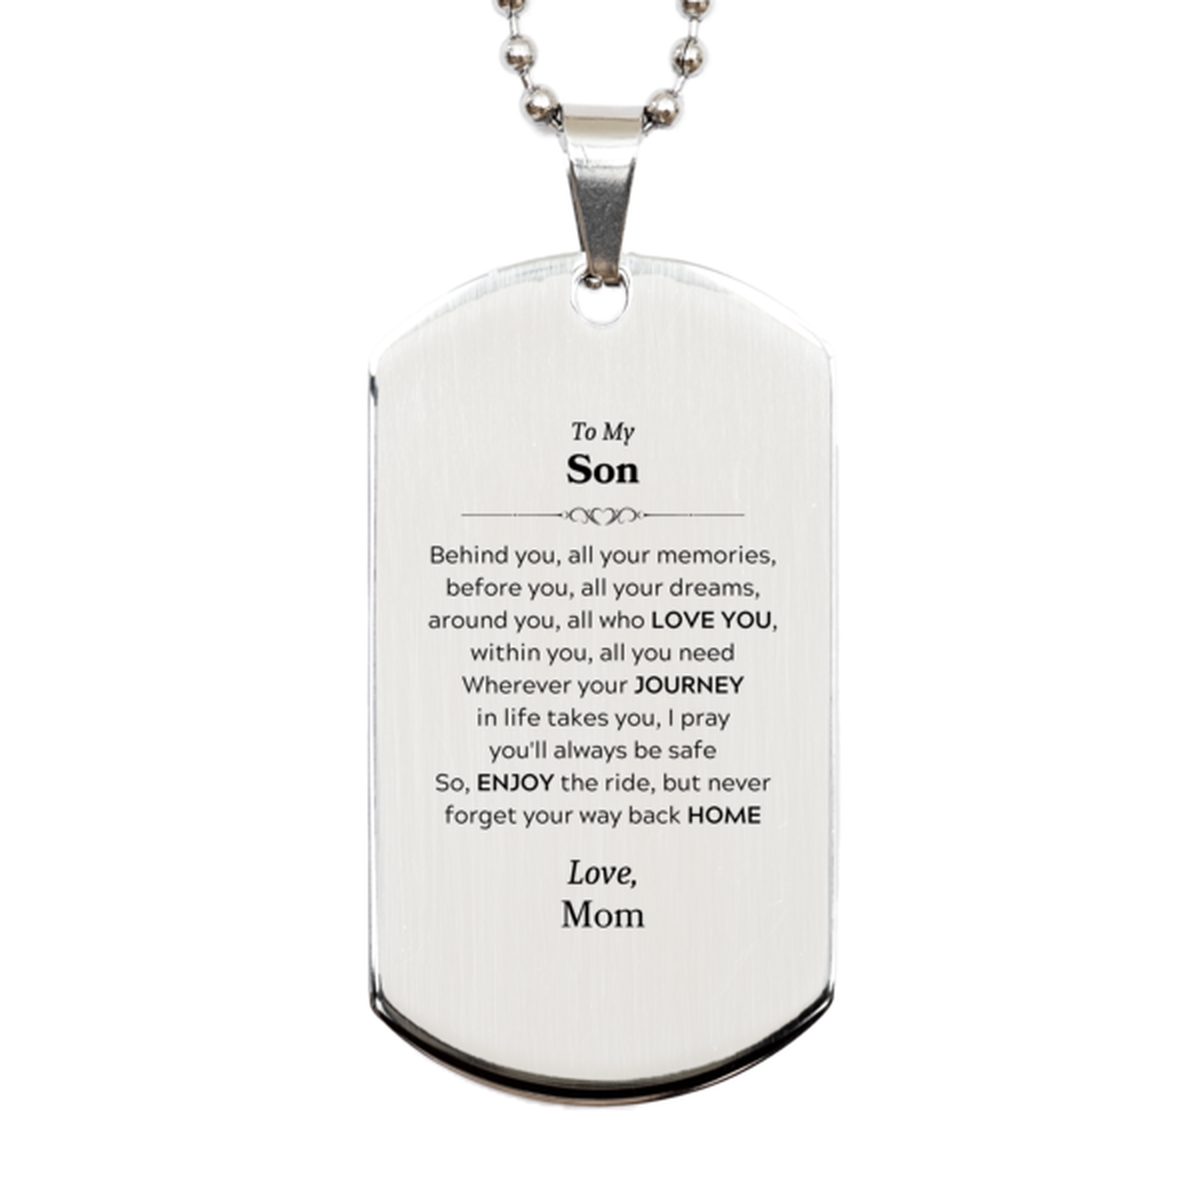 To My Son Graduation Gifts from Mom, Son Silver Dog Tag Christmas Birthday Gifts for Son Behind you, all your memories, before you, all your dreams. Love, Mom